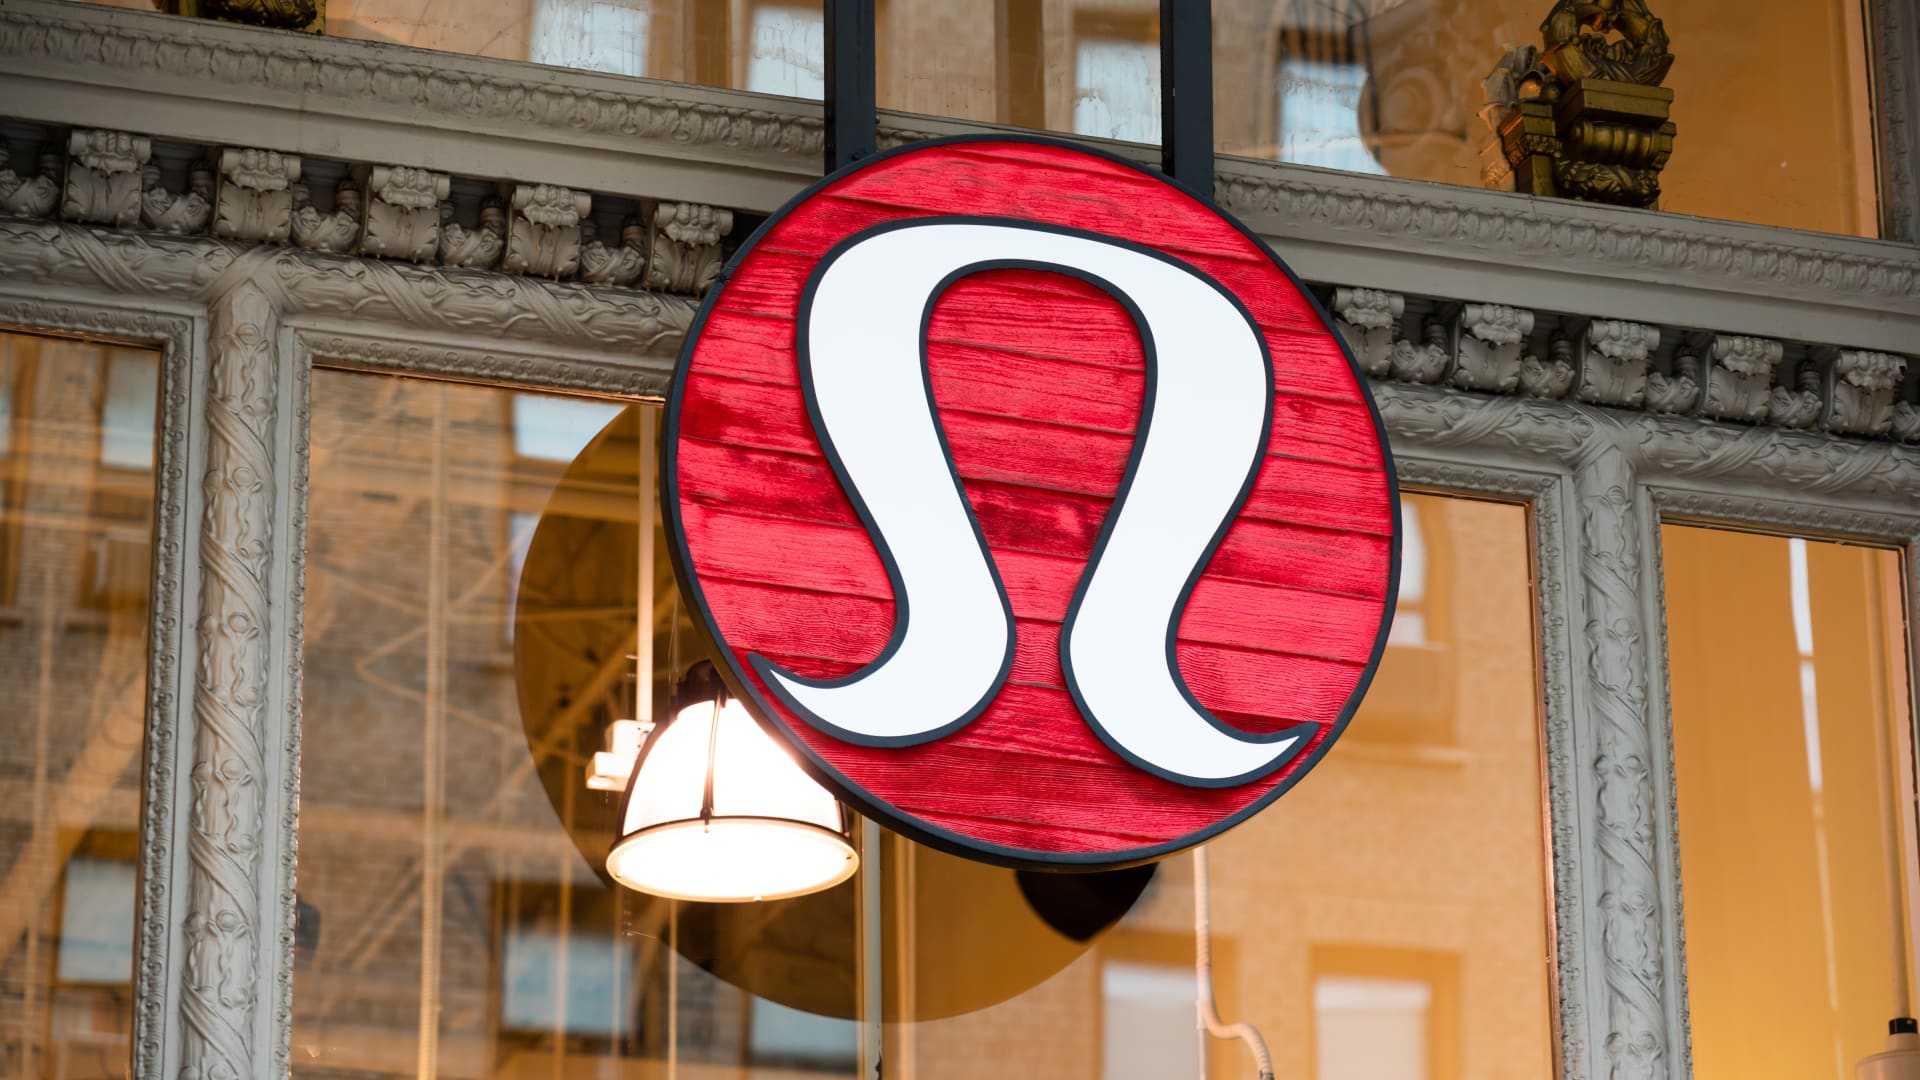 A view of a Canadian athletic apparel retailer Lululemon logo seen at one of their stores.